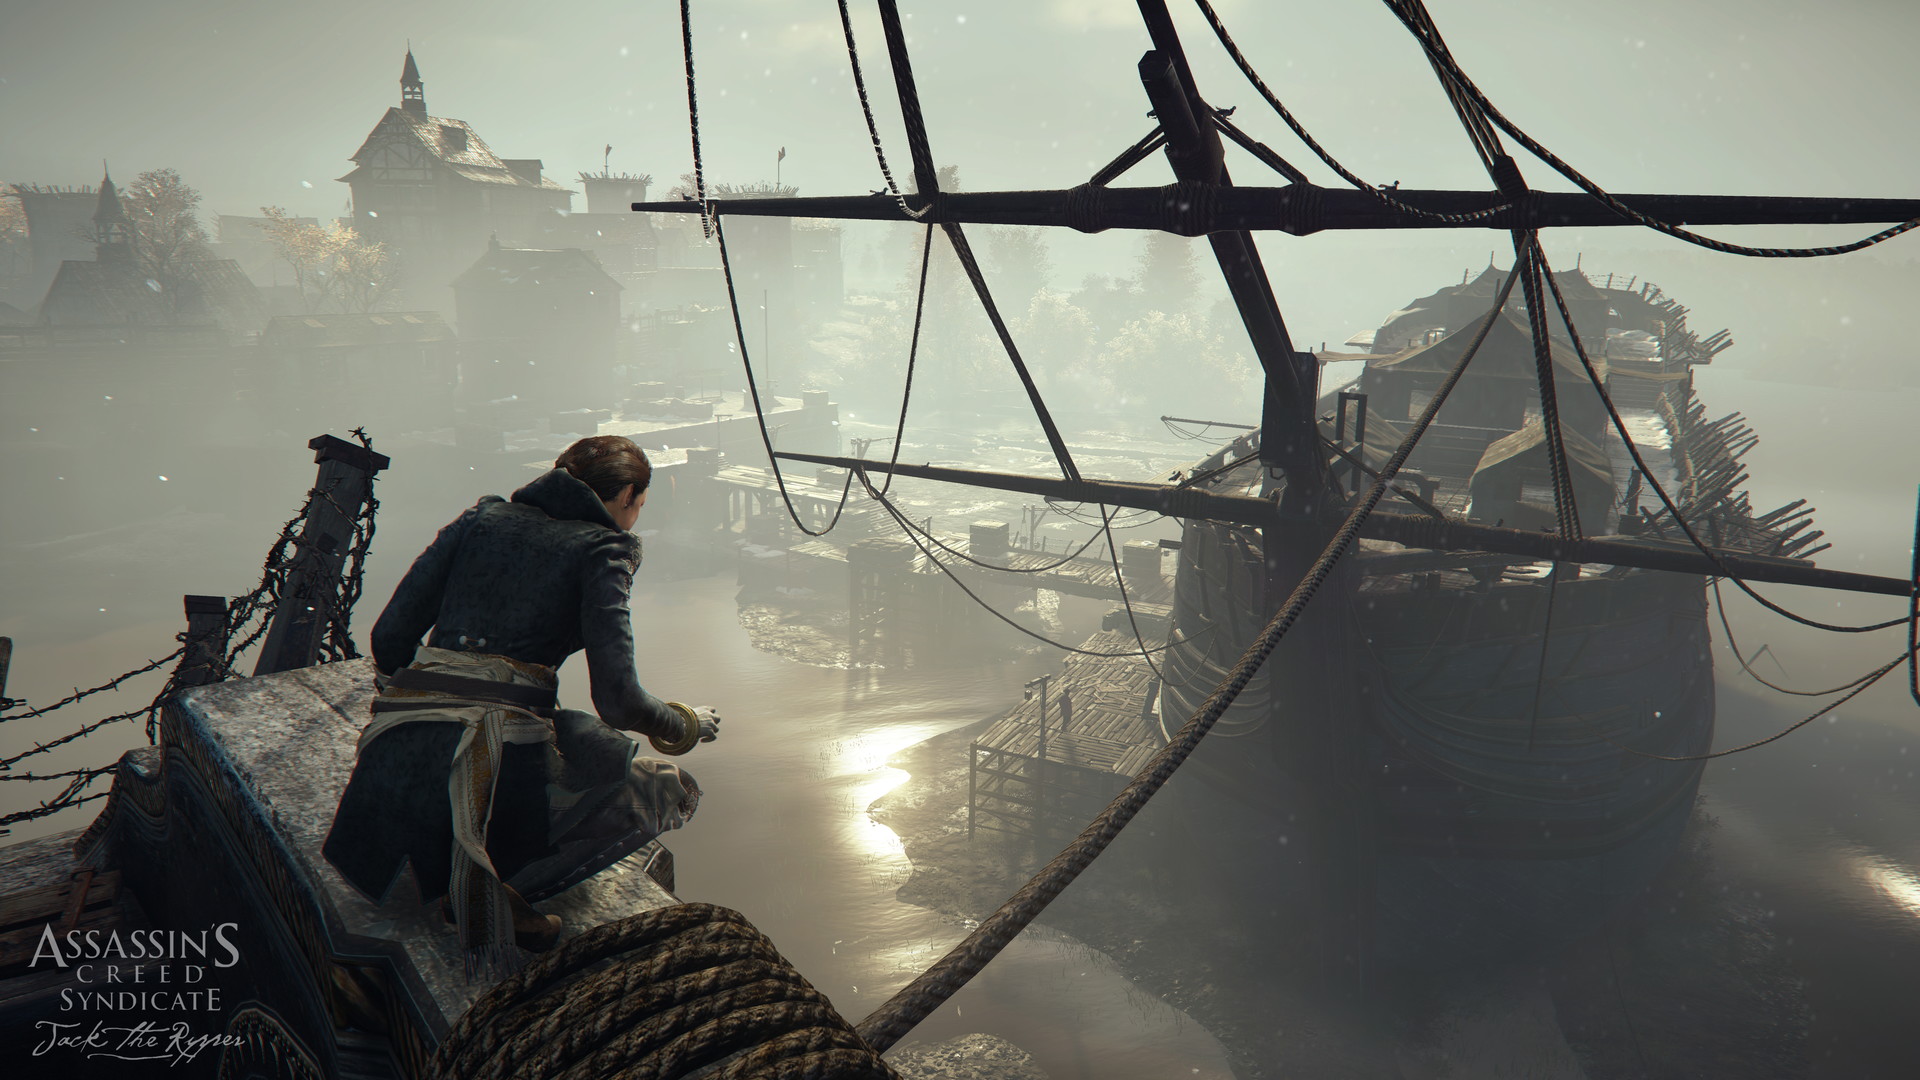 Assassin's Creed: Syndicate - Jack the Ripper - screenshot 1